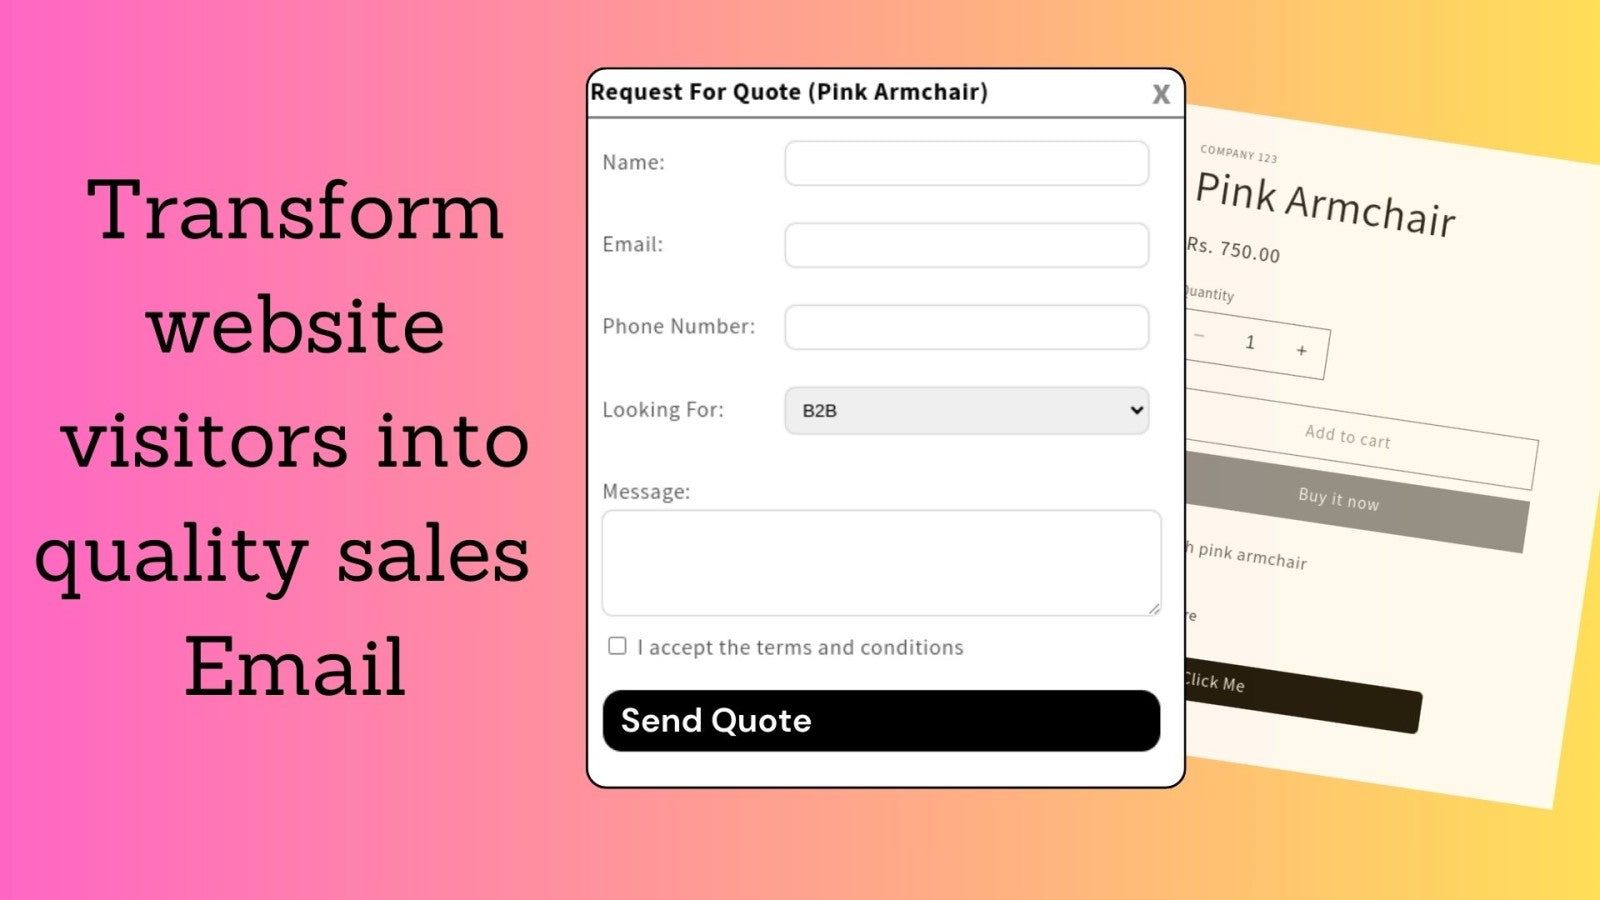 Empower your quoting process with personalized forms